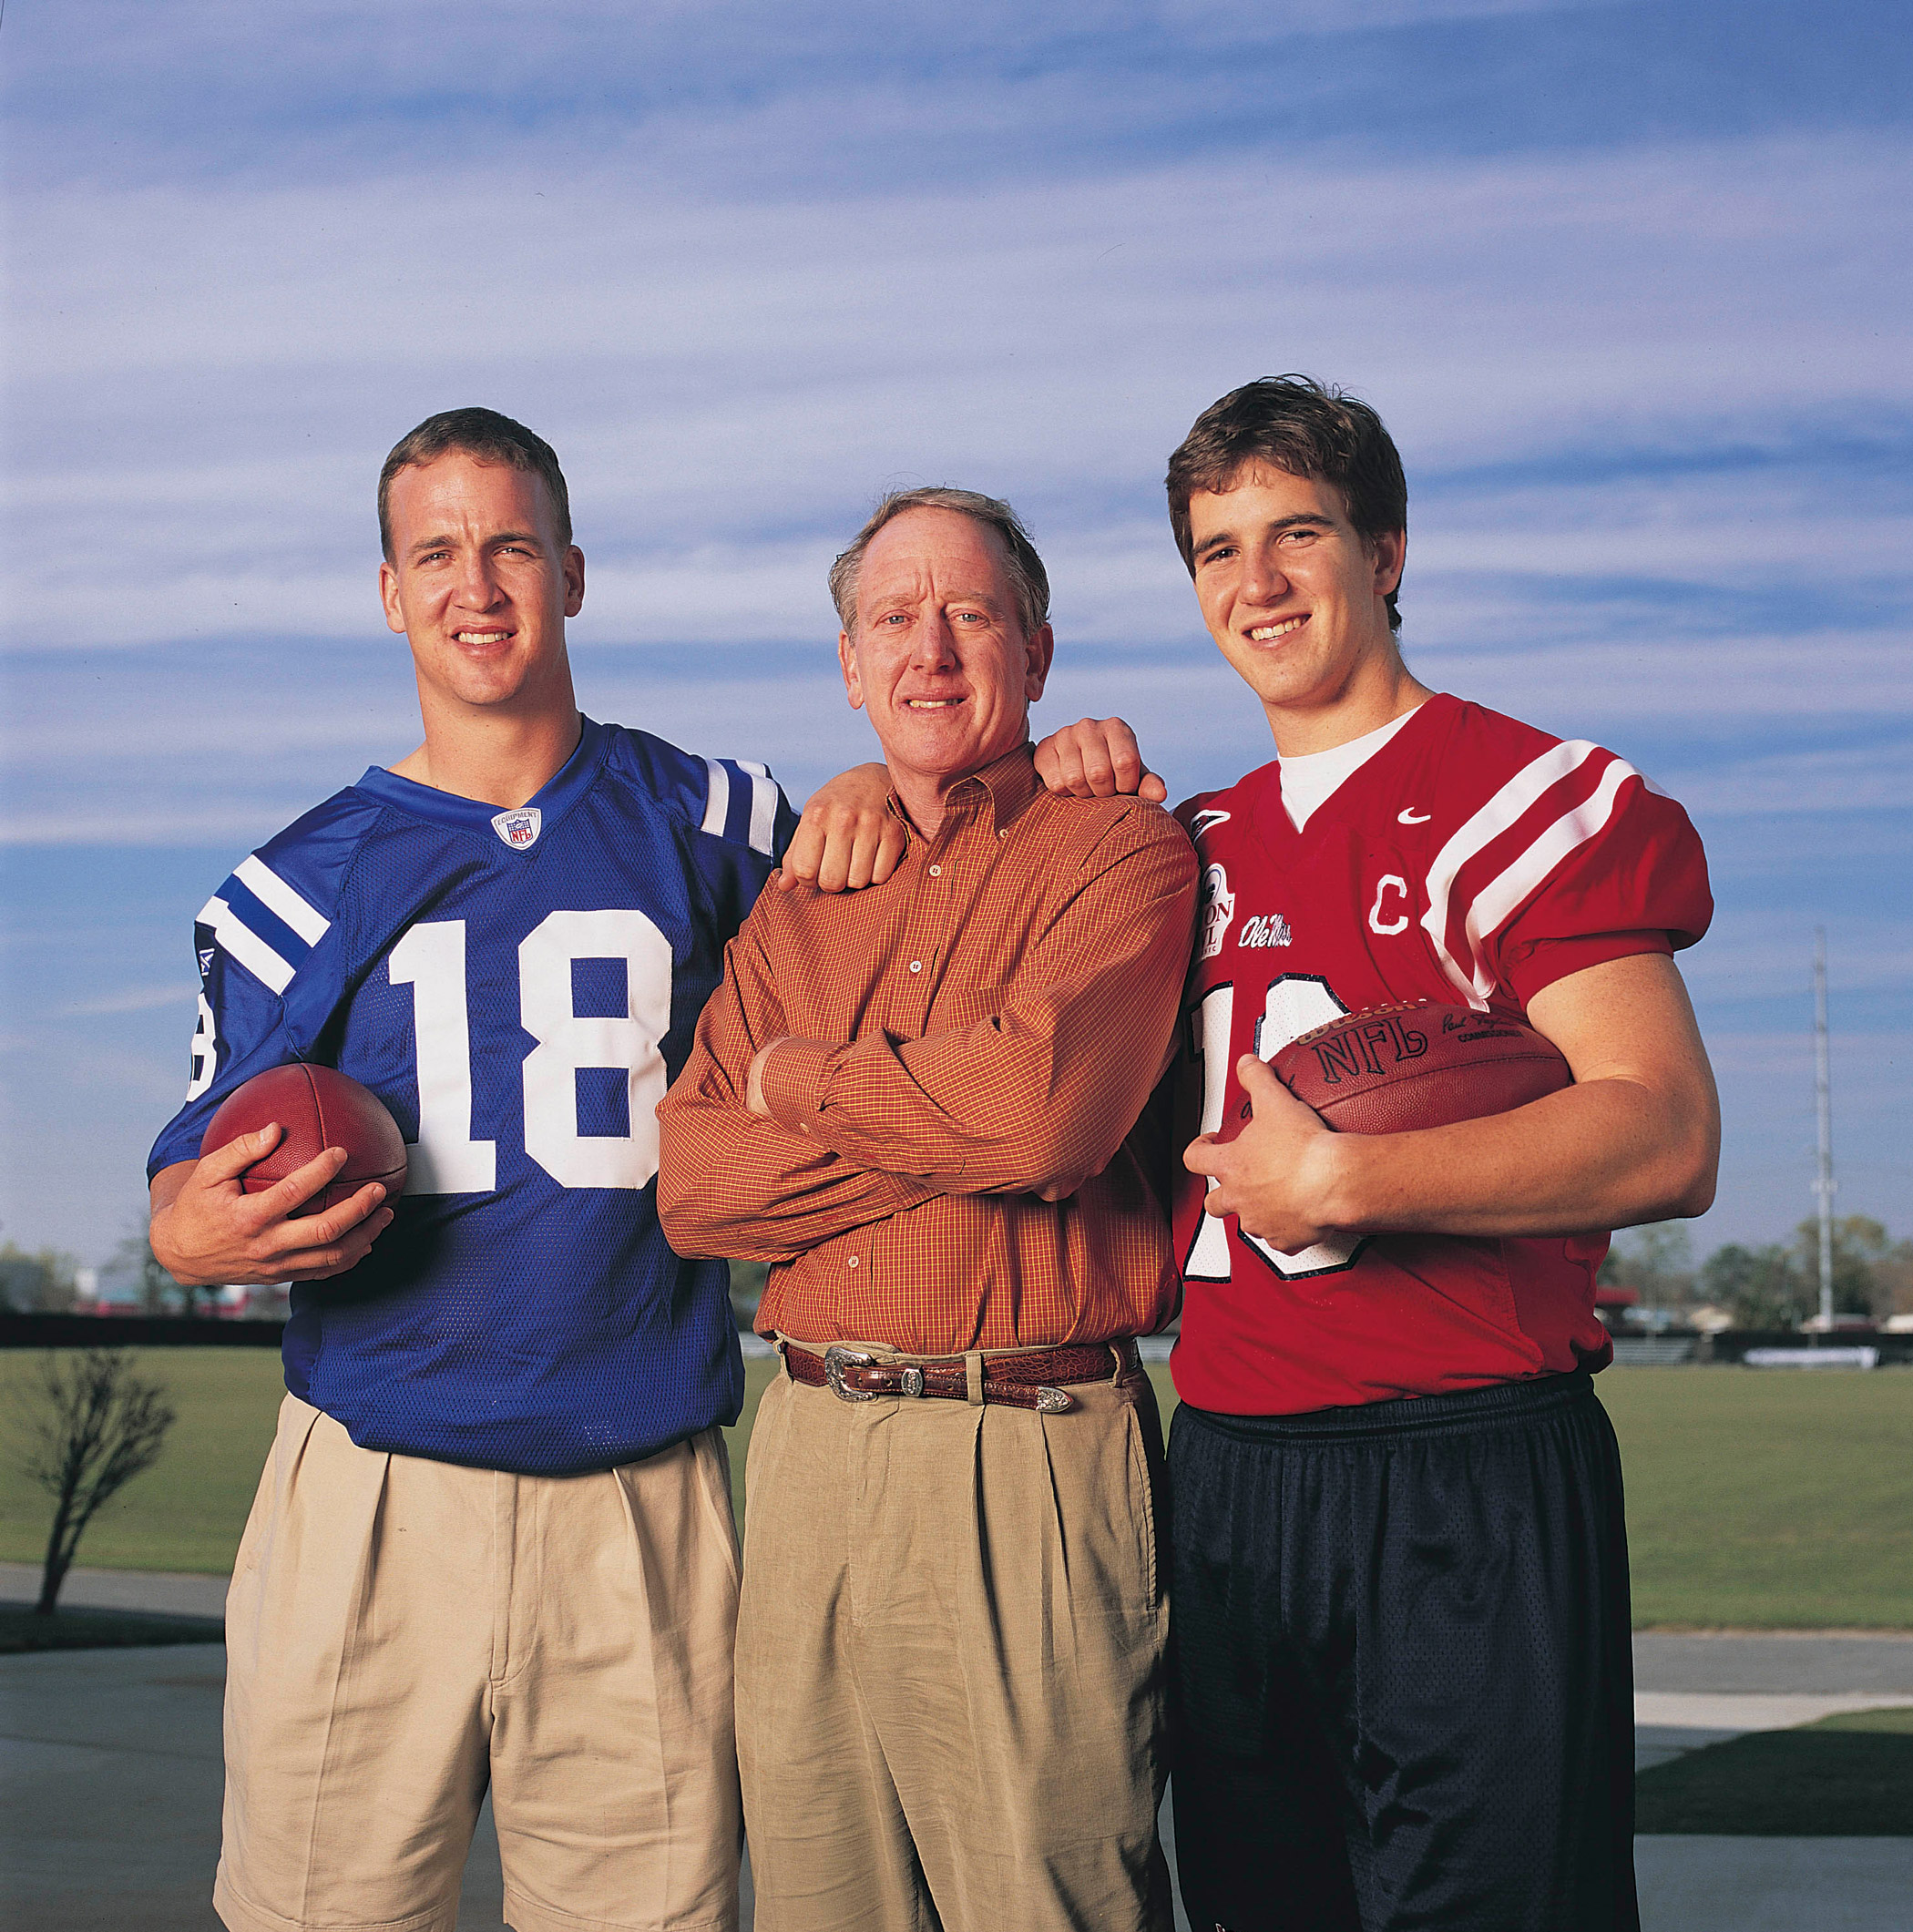 The Mannings pose for a portrait in 2004. From left are Indianapolis Colts quarterback Peyton Manning, former New Orleans Saints quarterback Archie Manning and New York Giants quarterback Eli Manning.